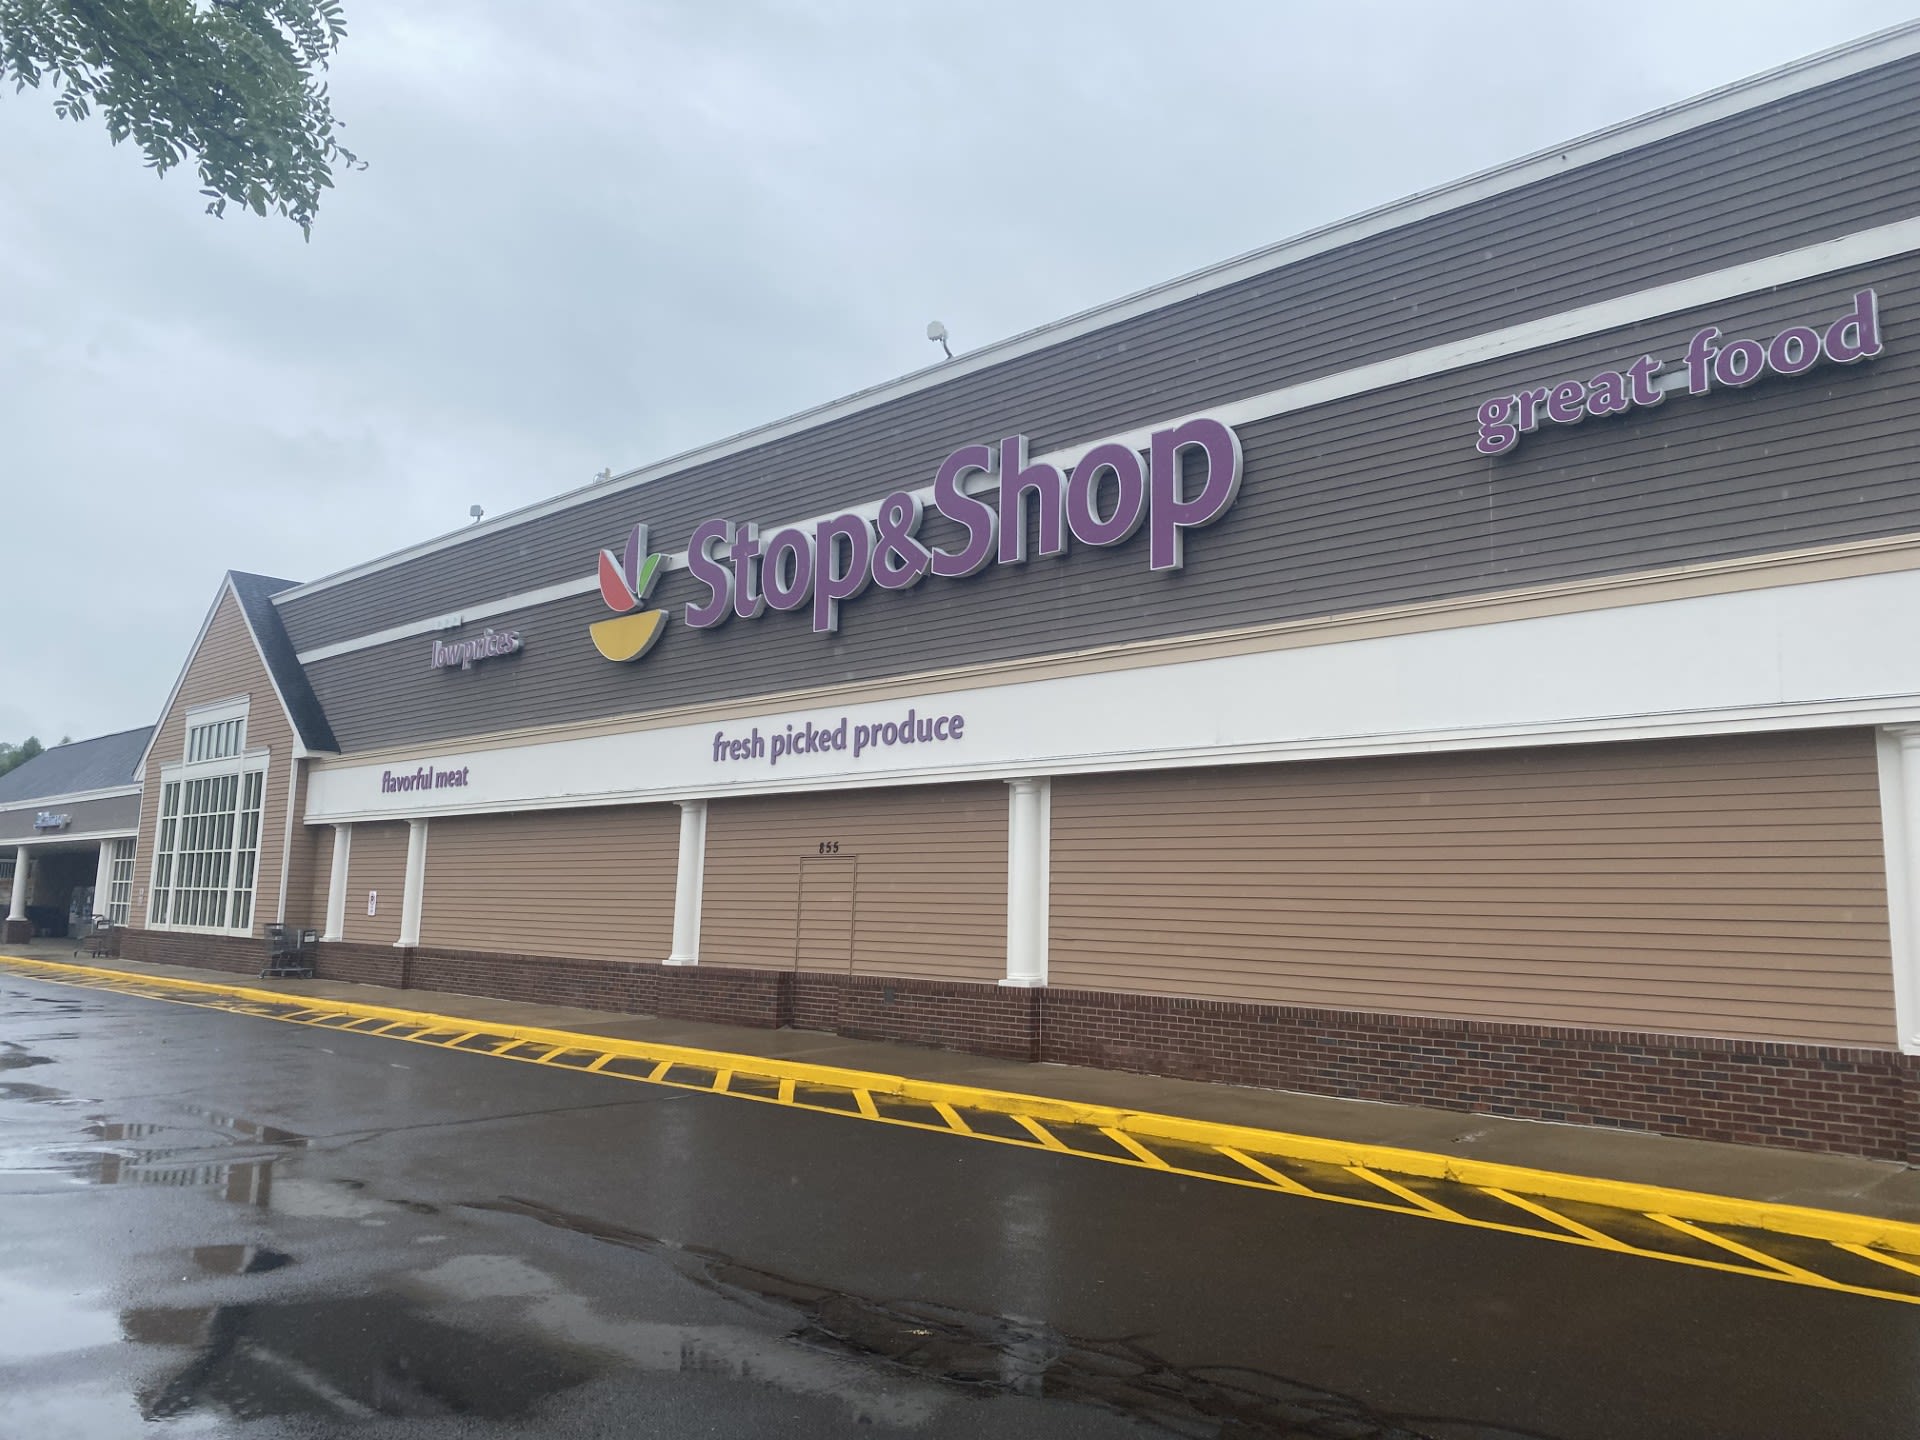 Closure of five CT Stop & Shop stores surprises some officials: 'Nobody...contacted me'